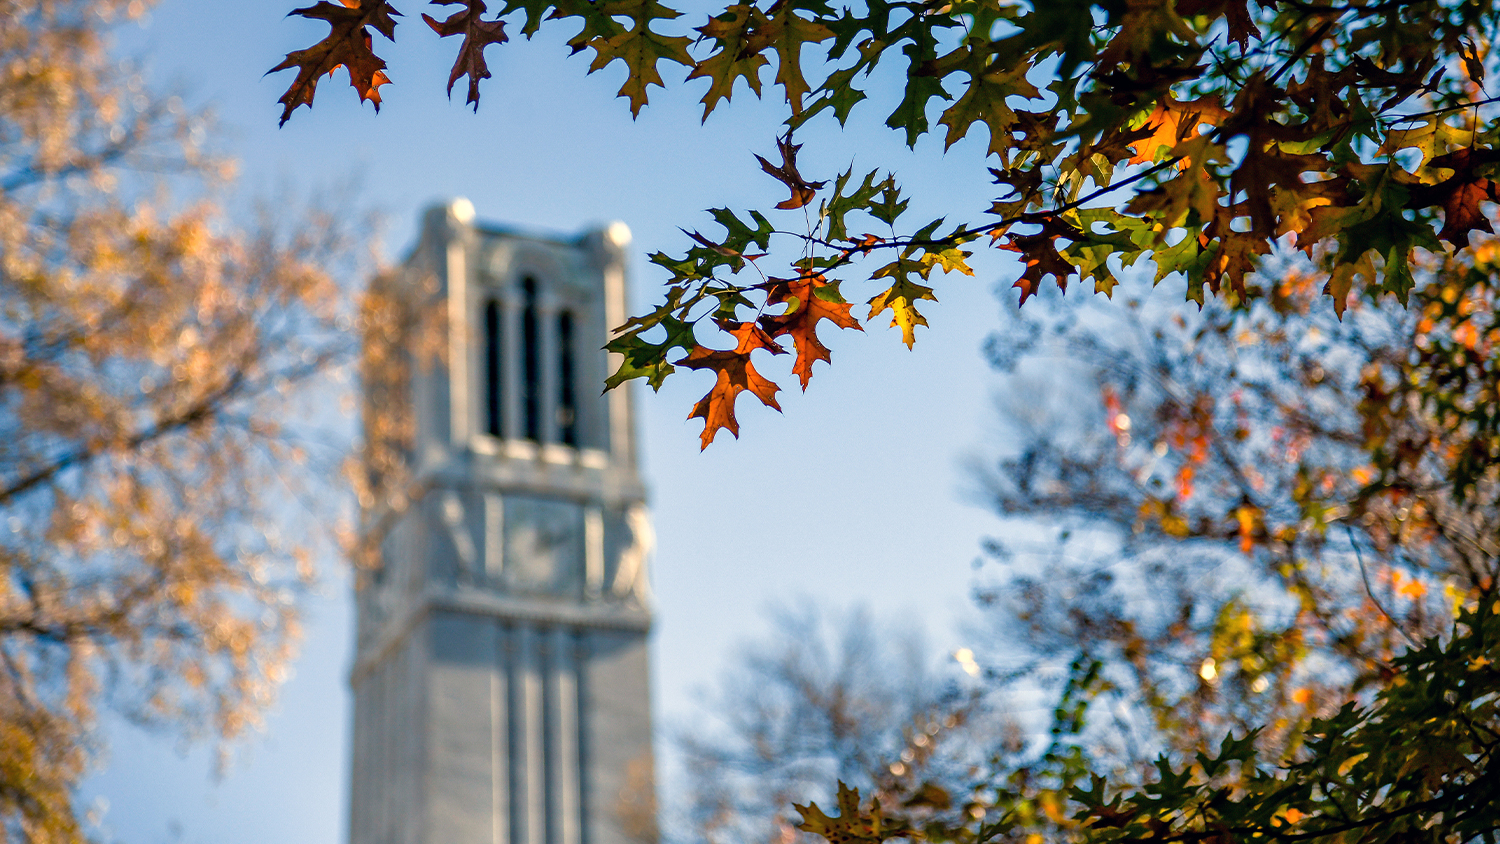 The Belltower provides a backdrop for colorful fall leaves. 